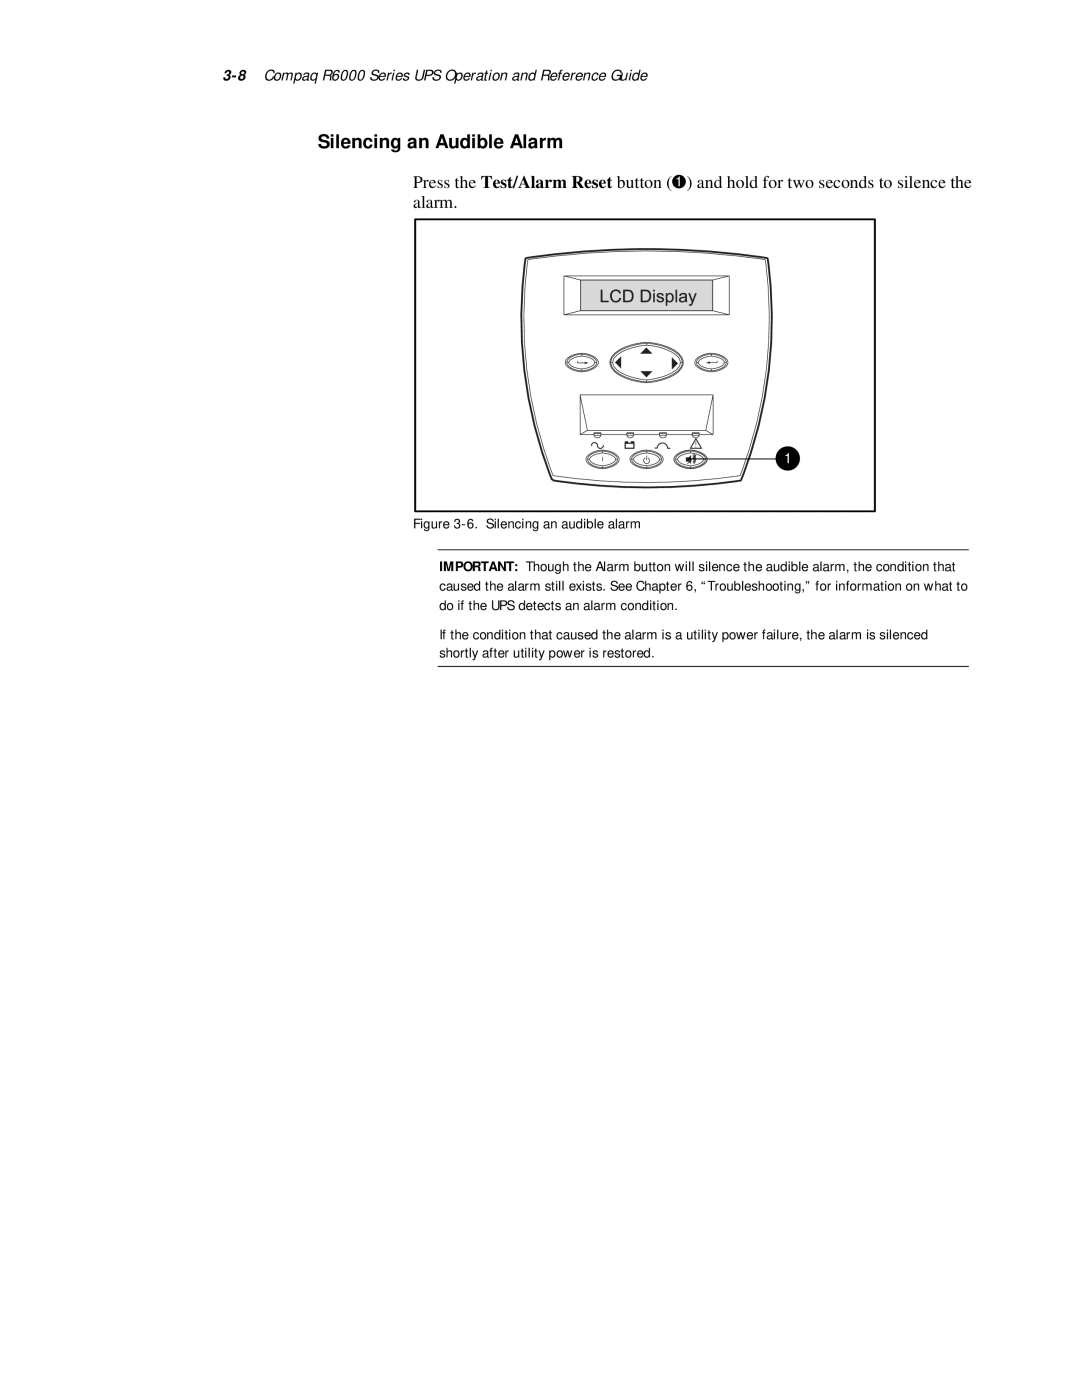 Compaq manual Silencing an Audible Alarm, Compaq R6000 Series UPS Operation and Reference Guide 